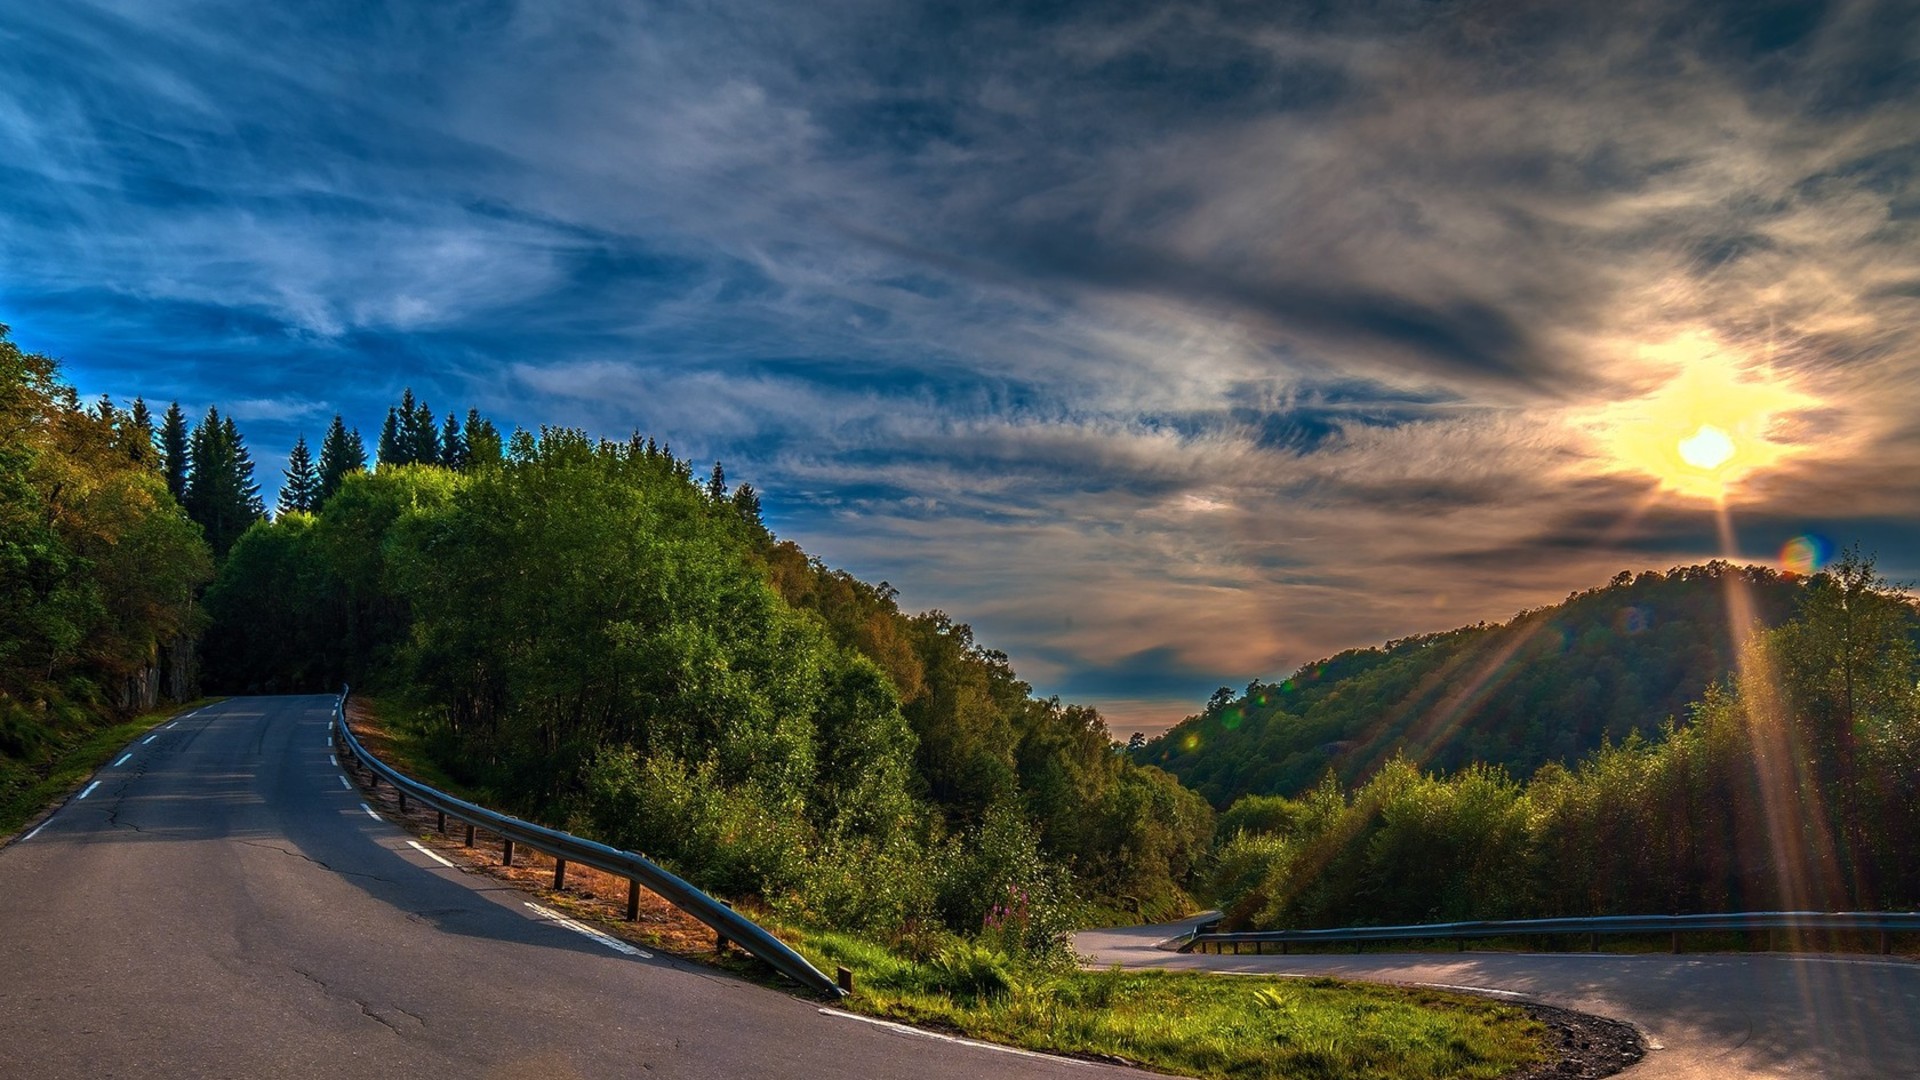 Mountain Road Backgrounds Wallpaper Images Picture Photos